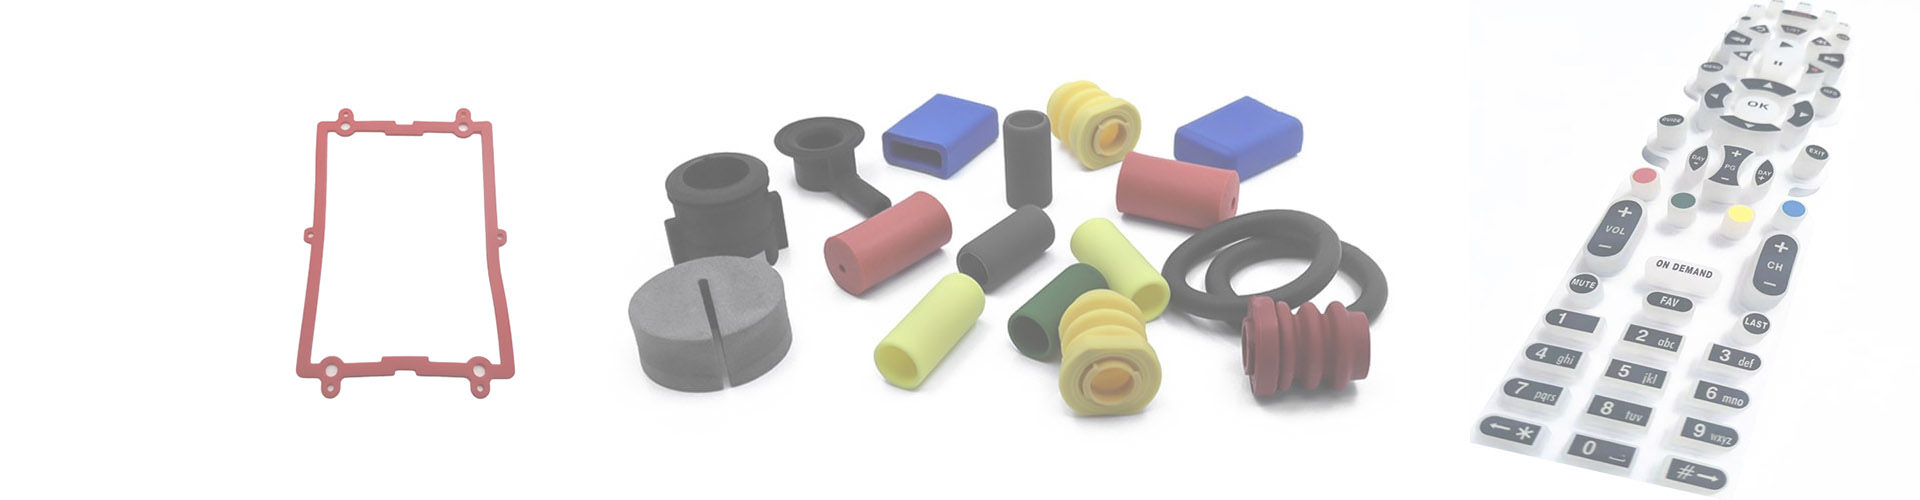 Silicone parts or accessories